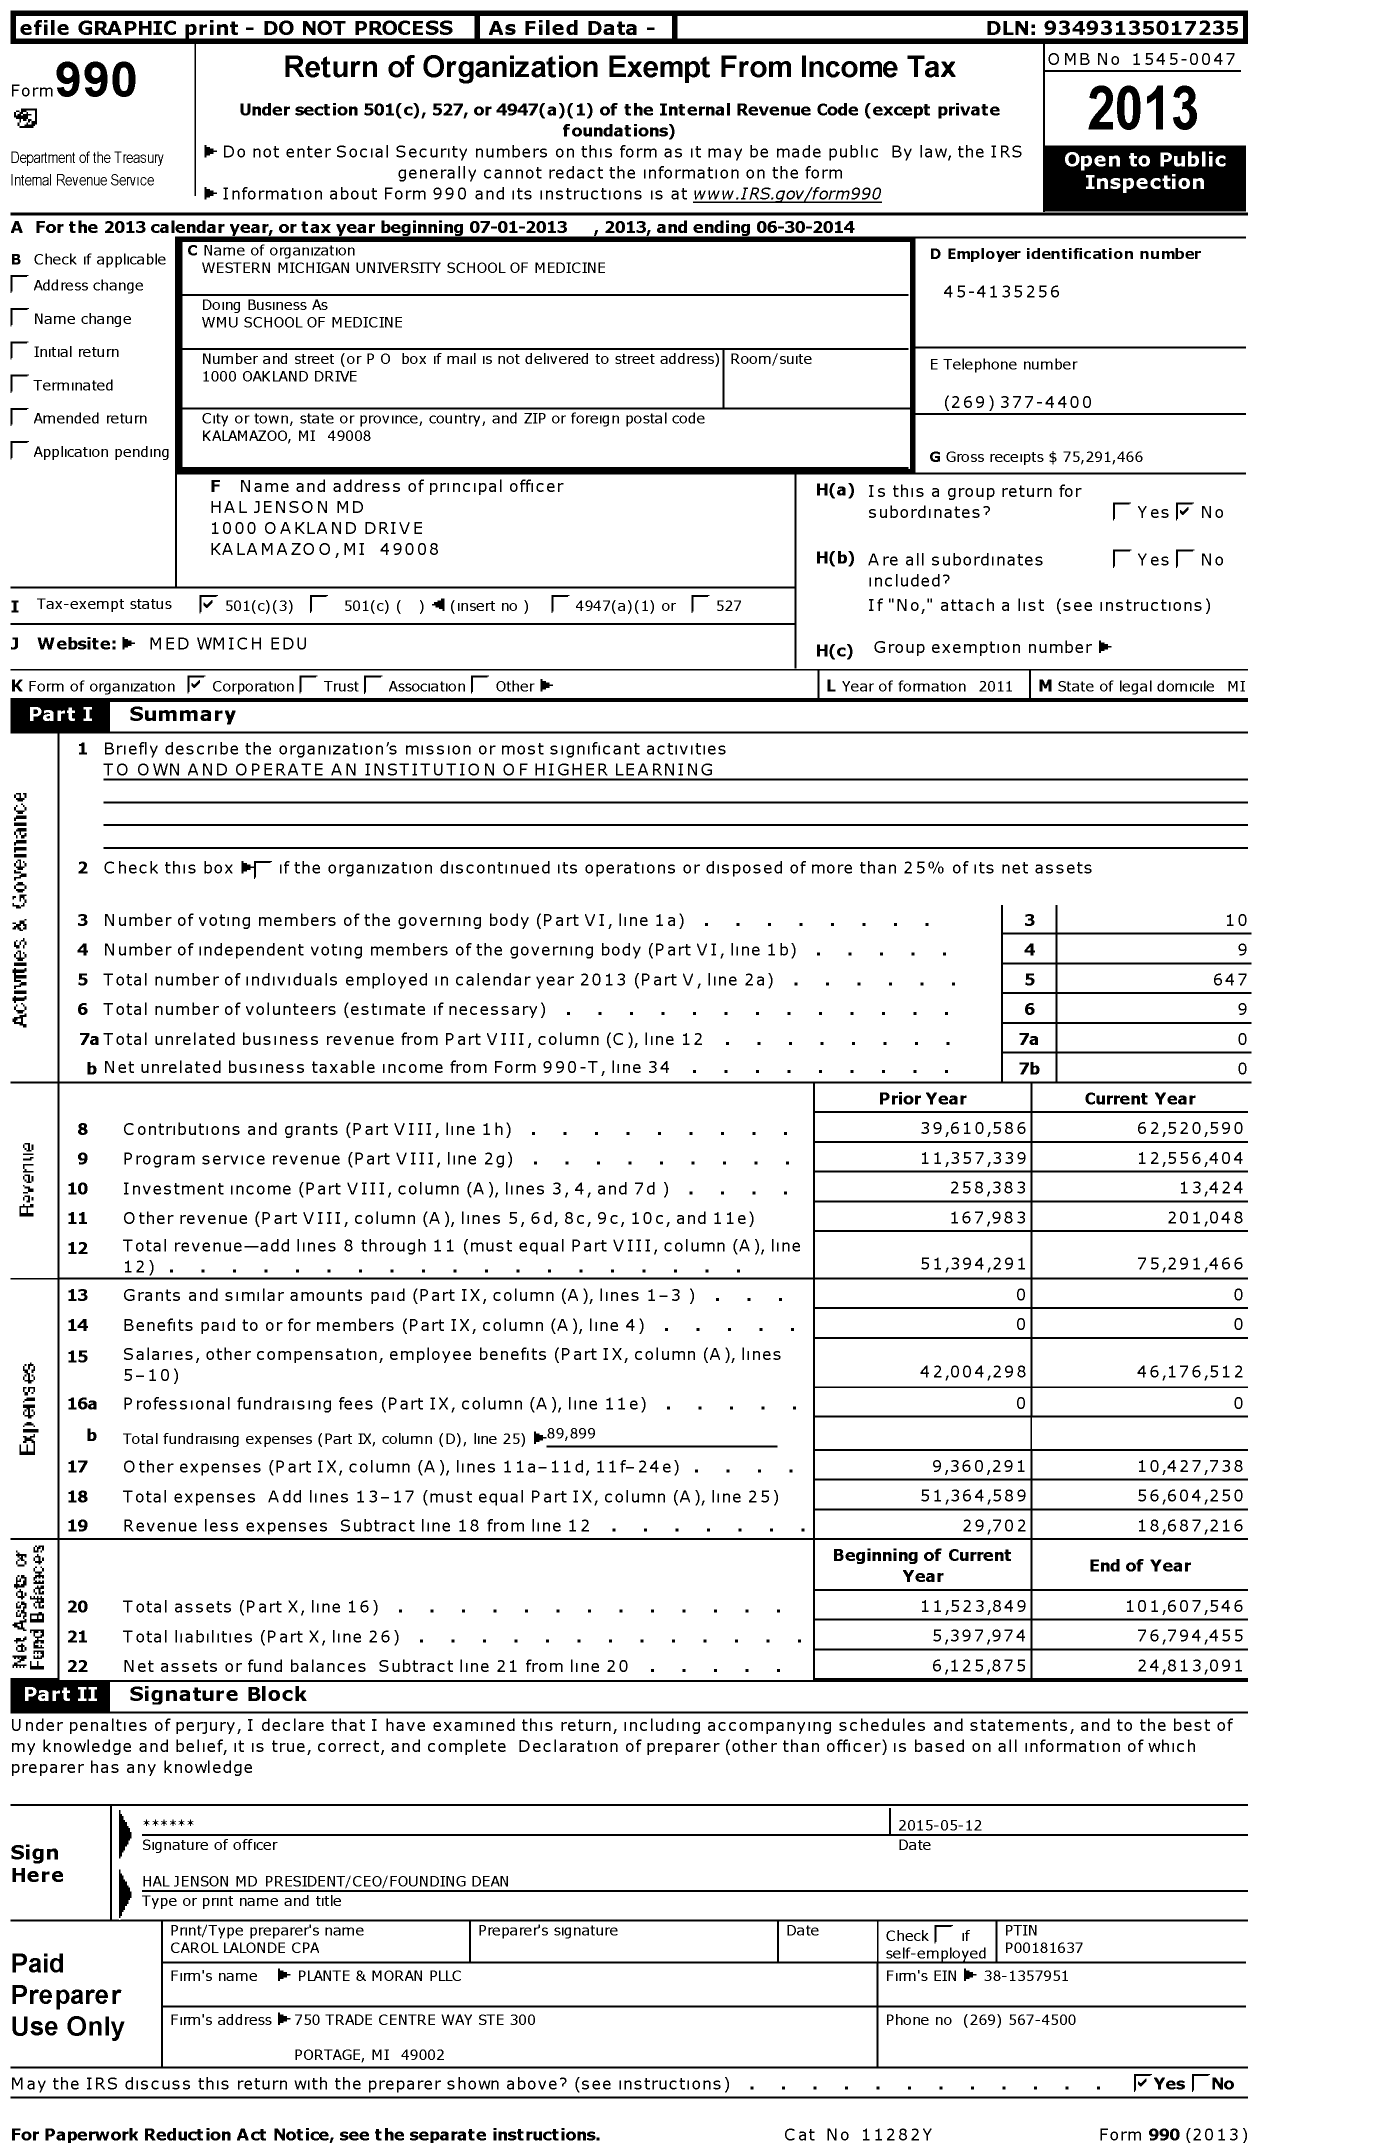 Image of first page of 2013 Form 990 for Wmu School of Medicine